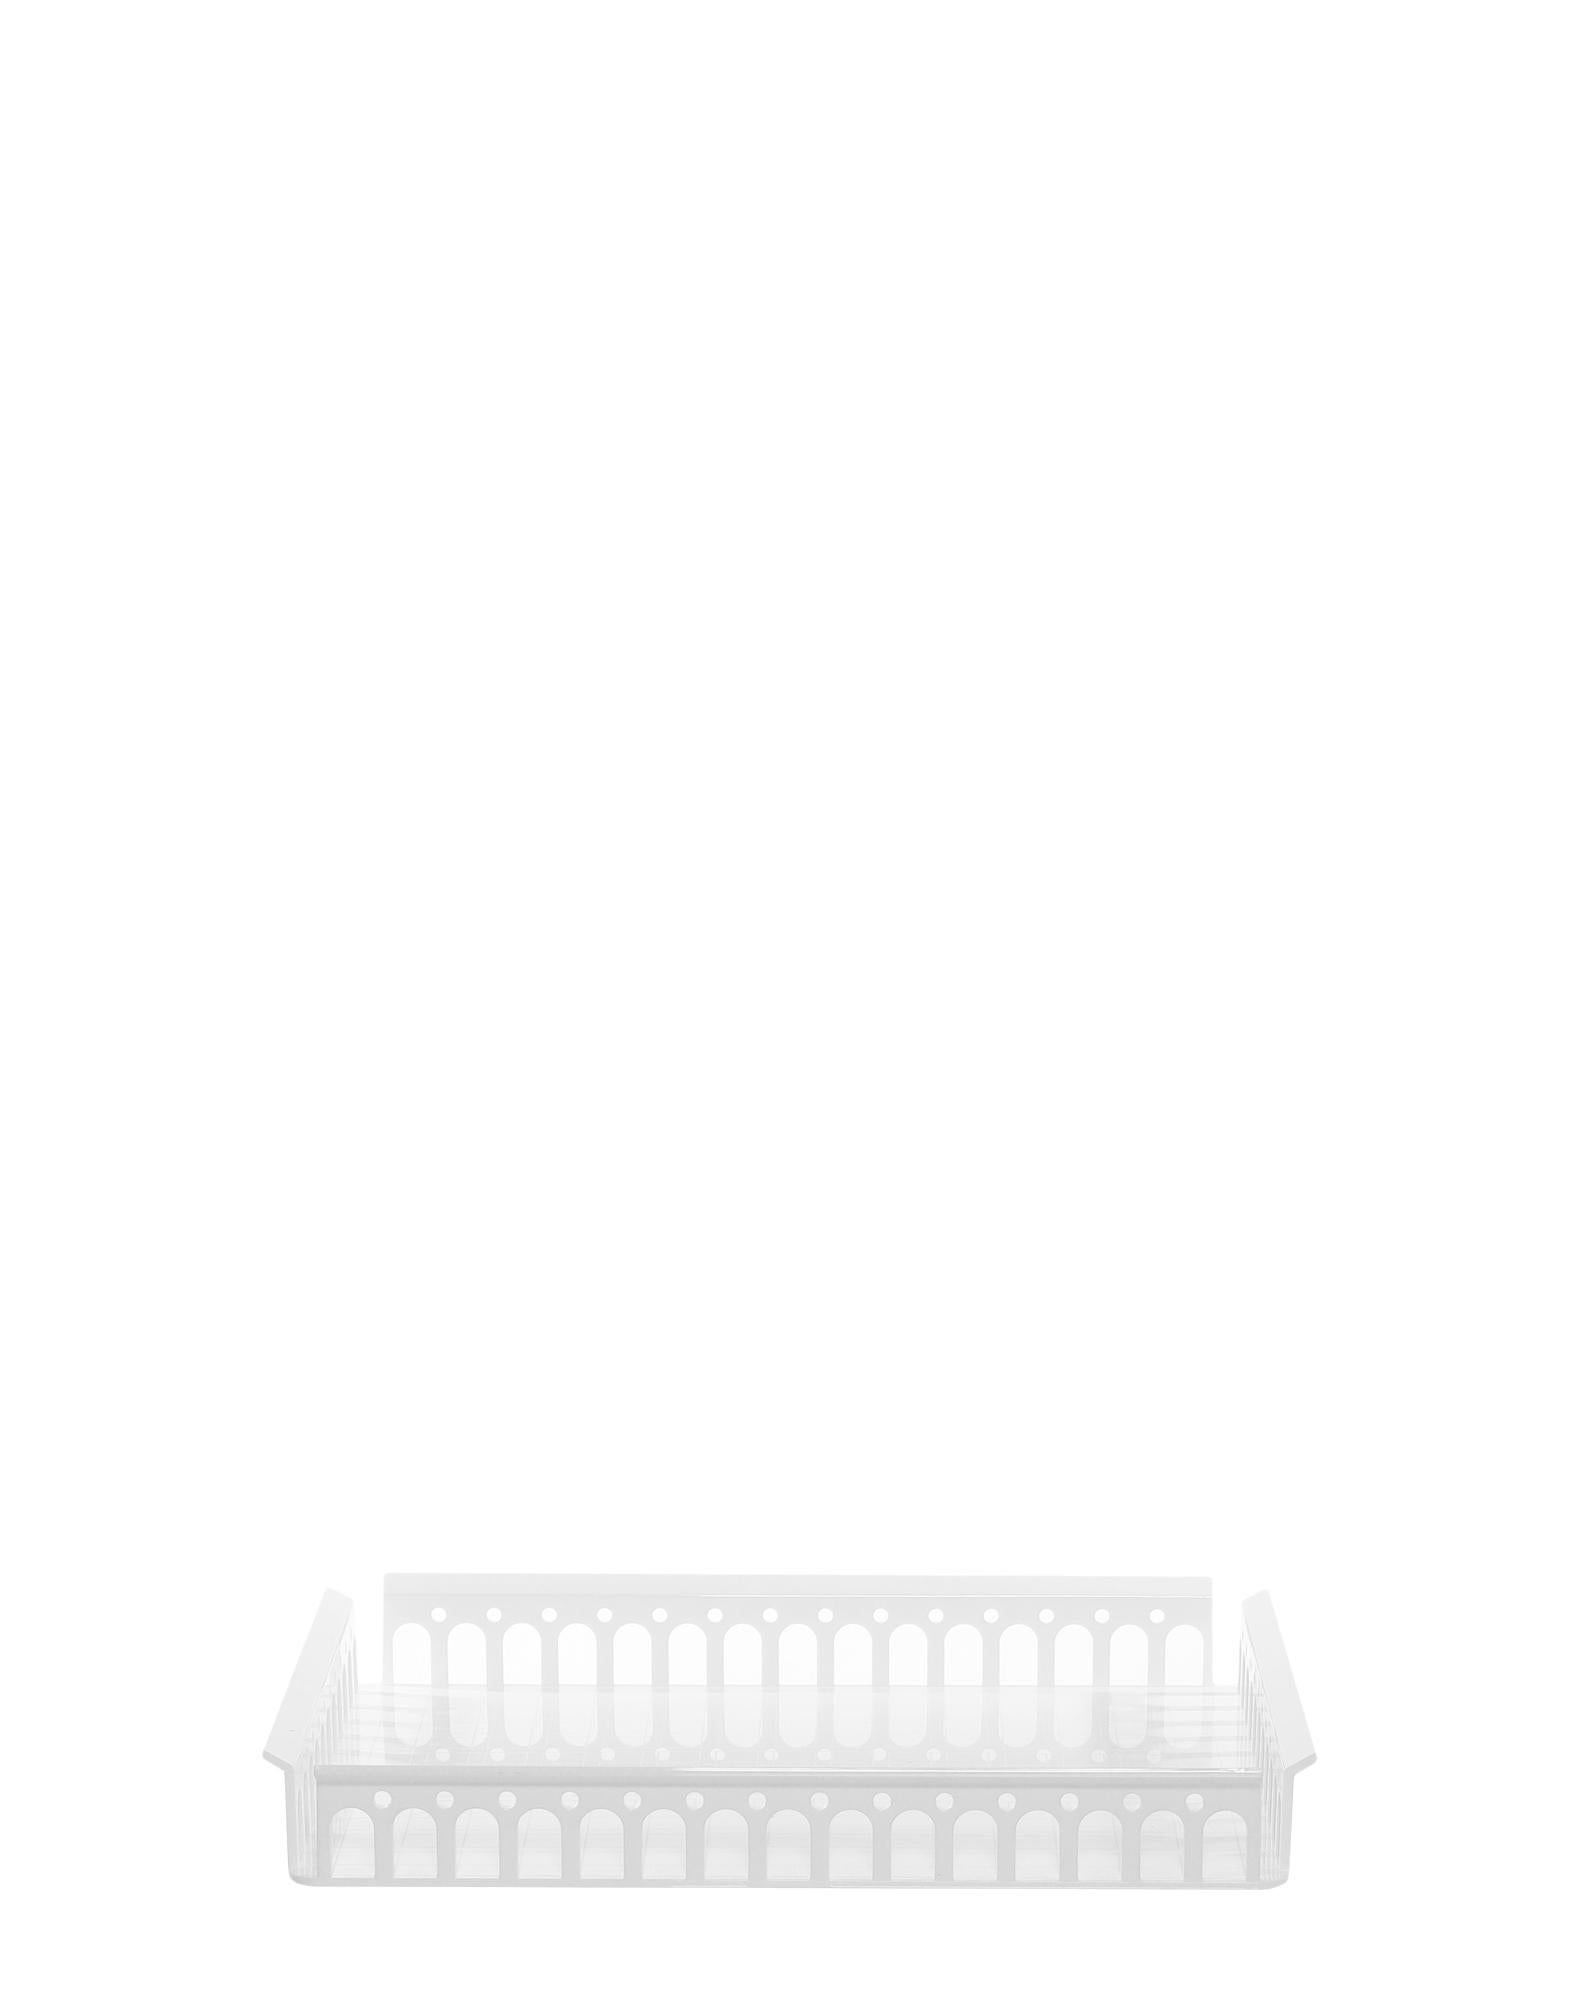 Crystal Kartell Piazza Tray in White by Fabio Novembre For Sale